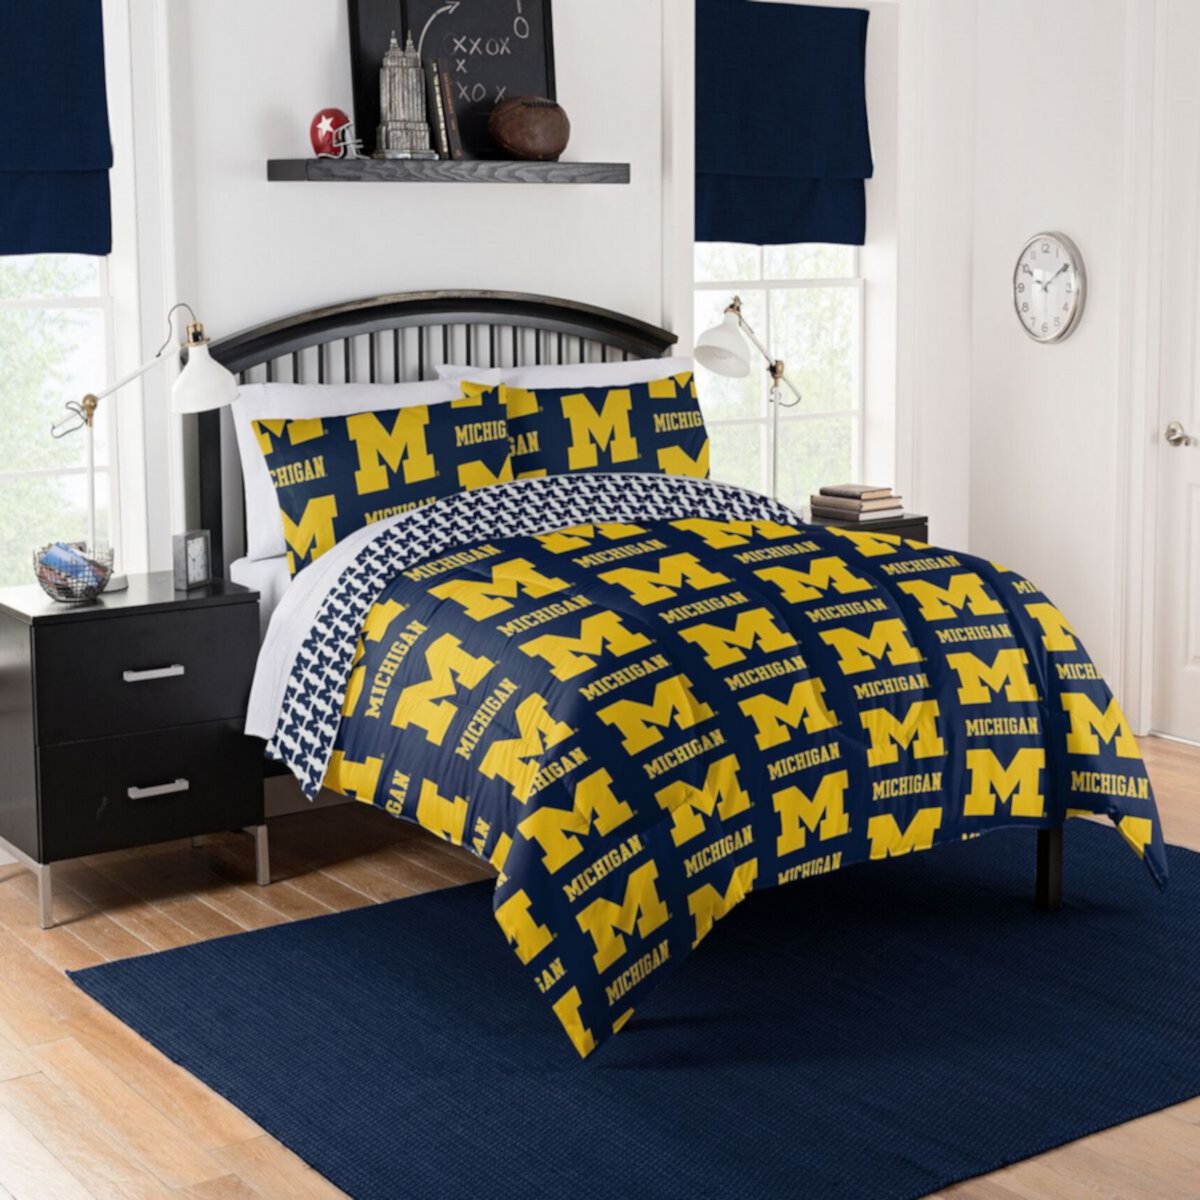 NCAA Michigan Wolverines Full Bedding Set by The Northwest The Northwest